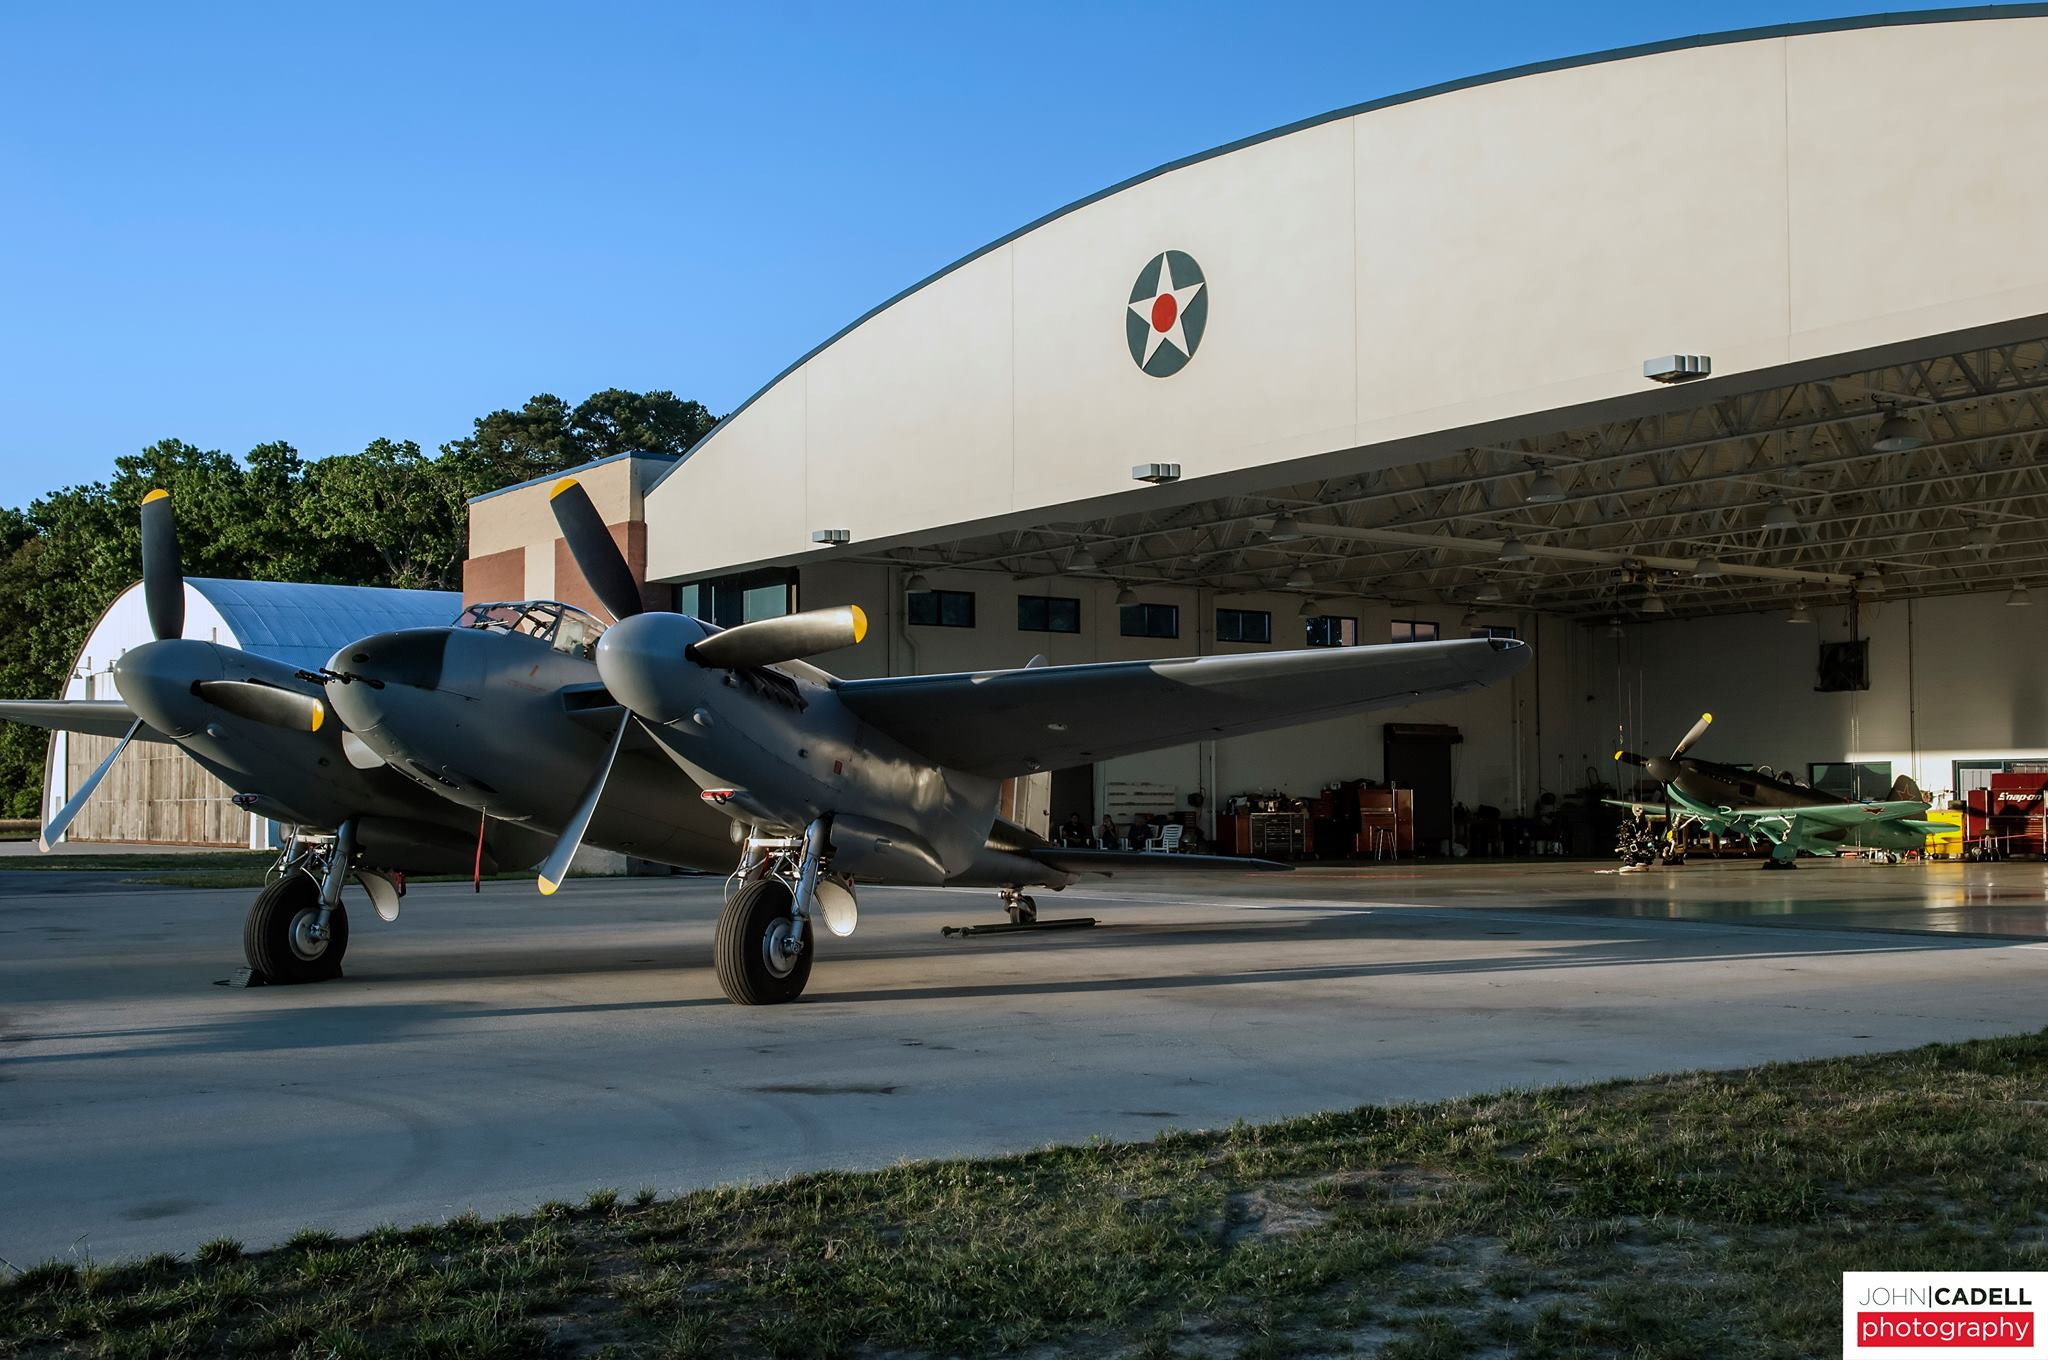 Four Military Aviation Museum Warbirds to Attend EAA AirVenture Oshkosh 2022